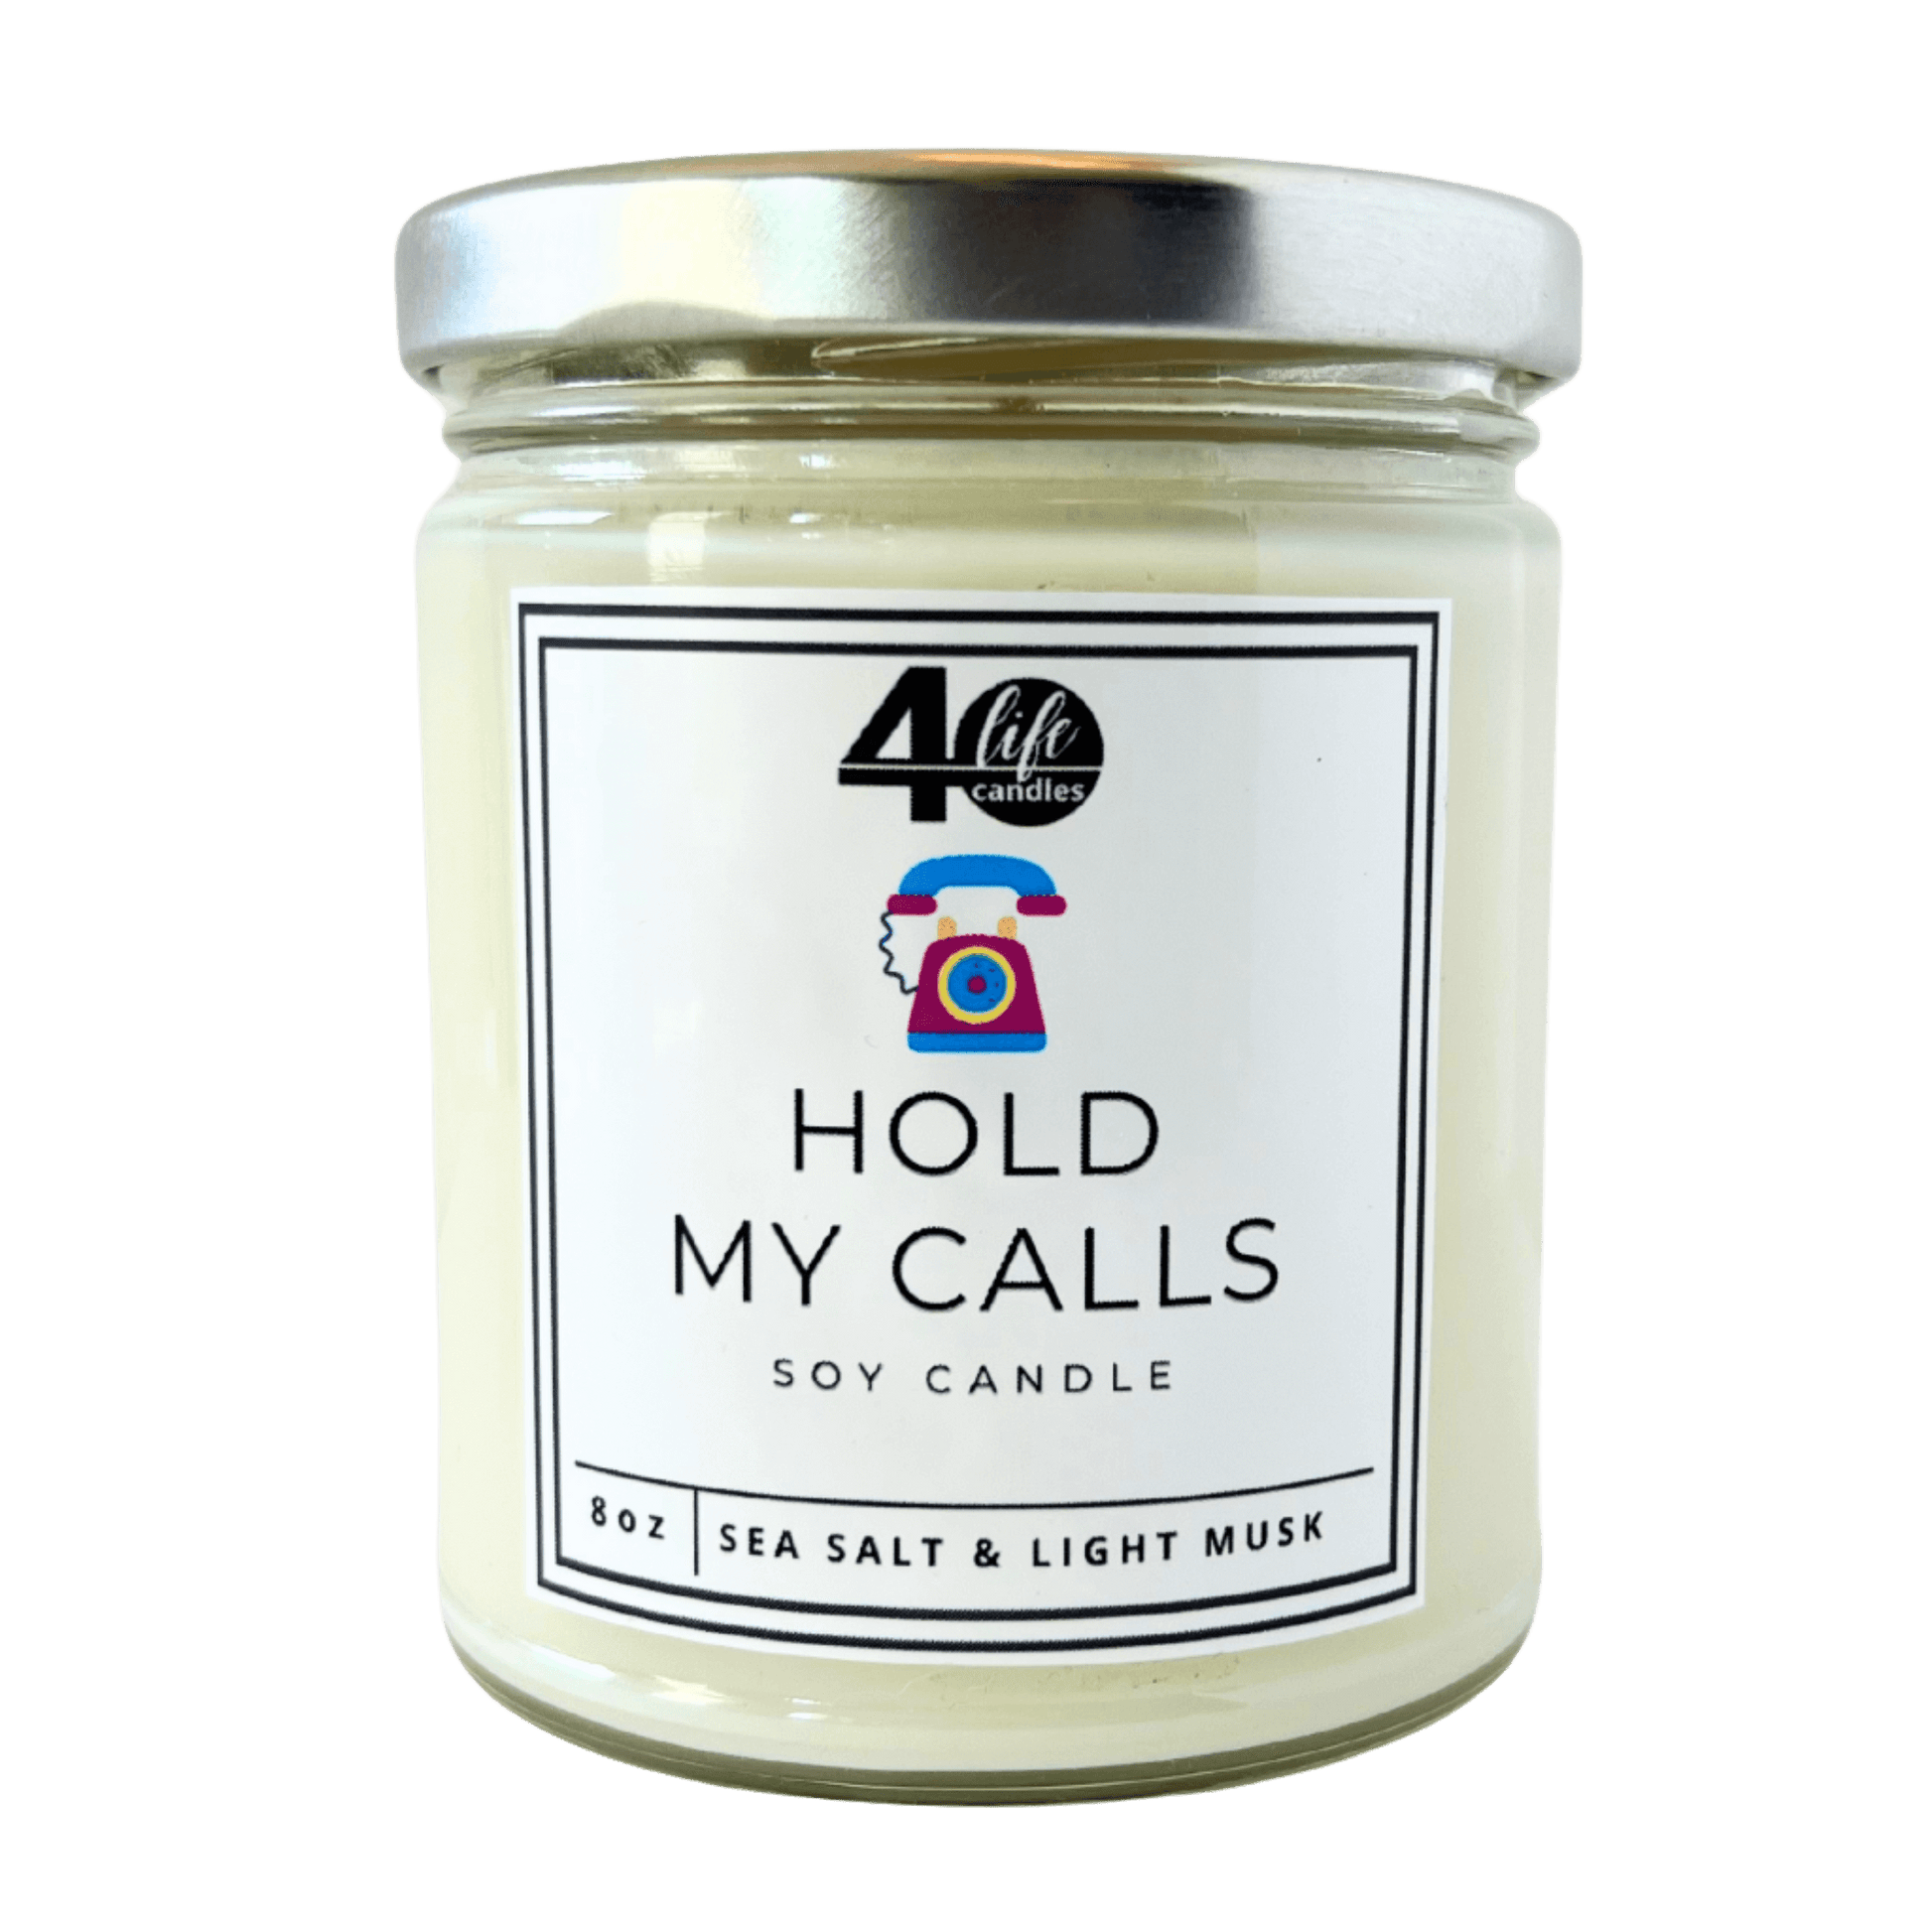 Hold My Calls soy candle